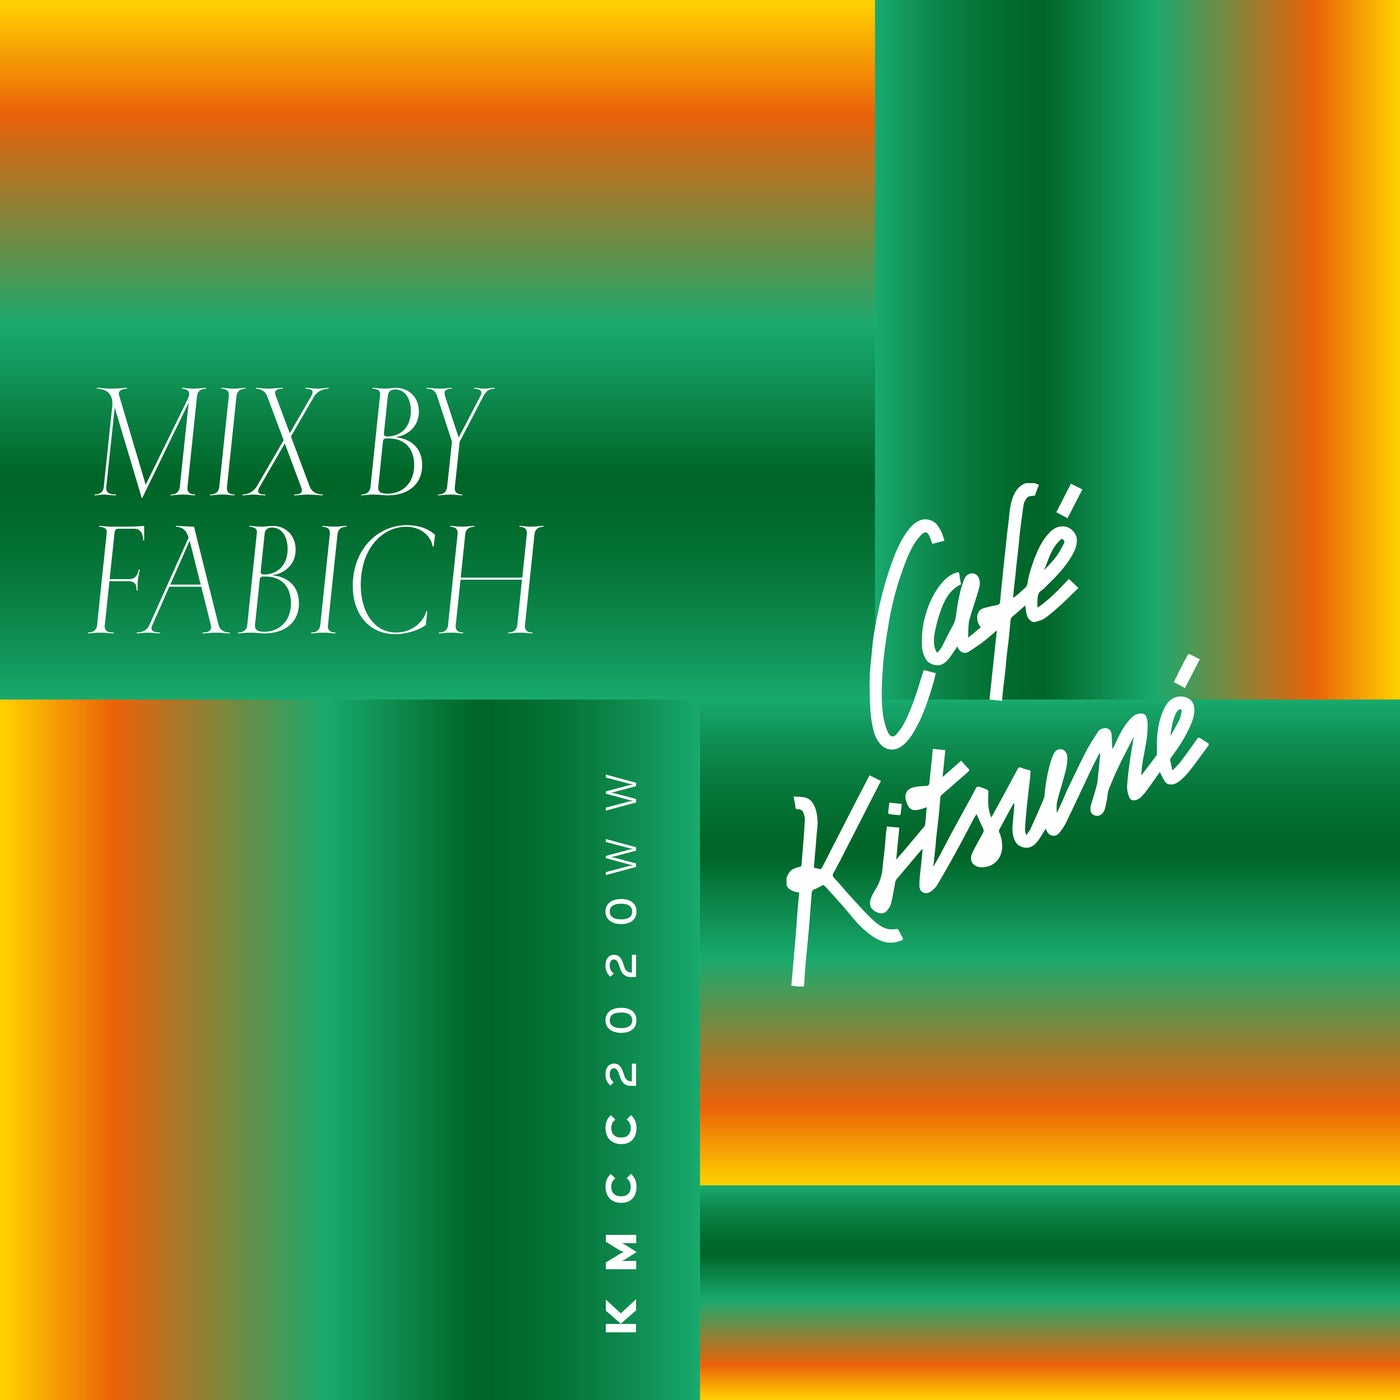 Cafe Kitsune Mixed by Fabich